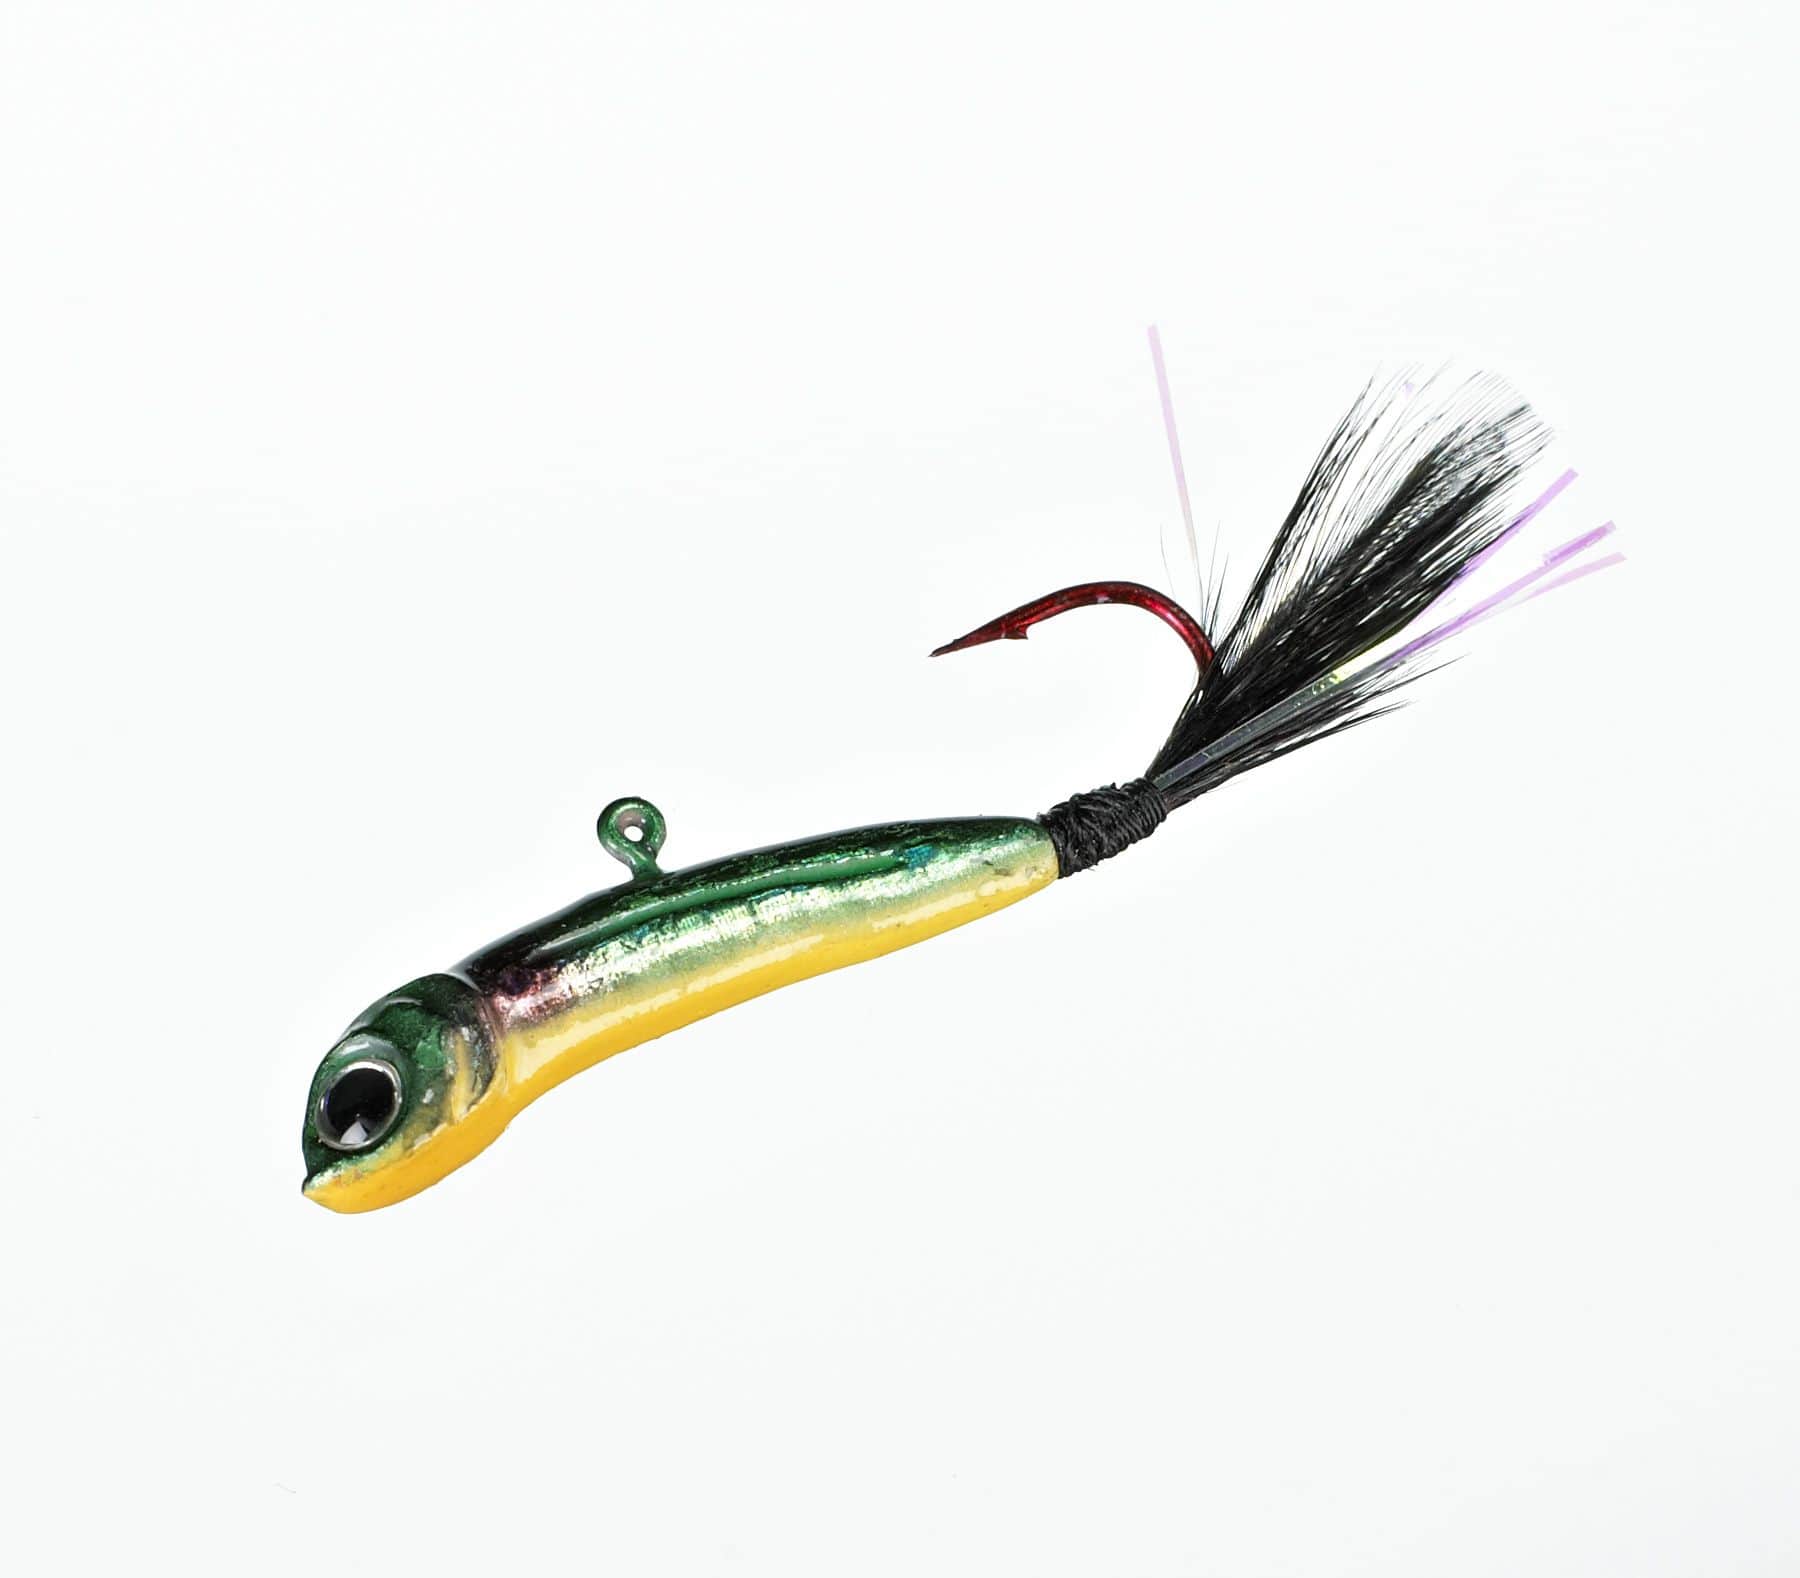 Northland Rippin' Minnow: Best of Both Worlds - The Fishing Wire